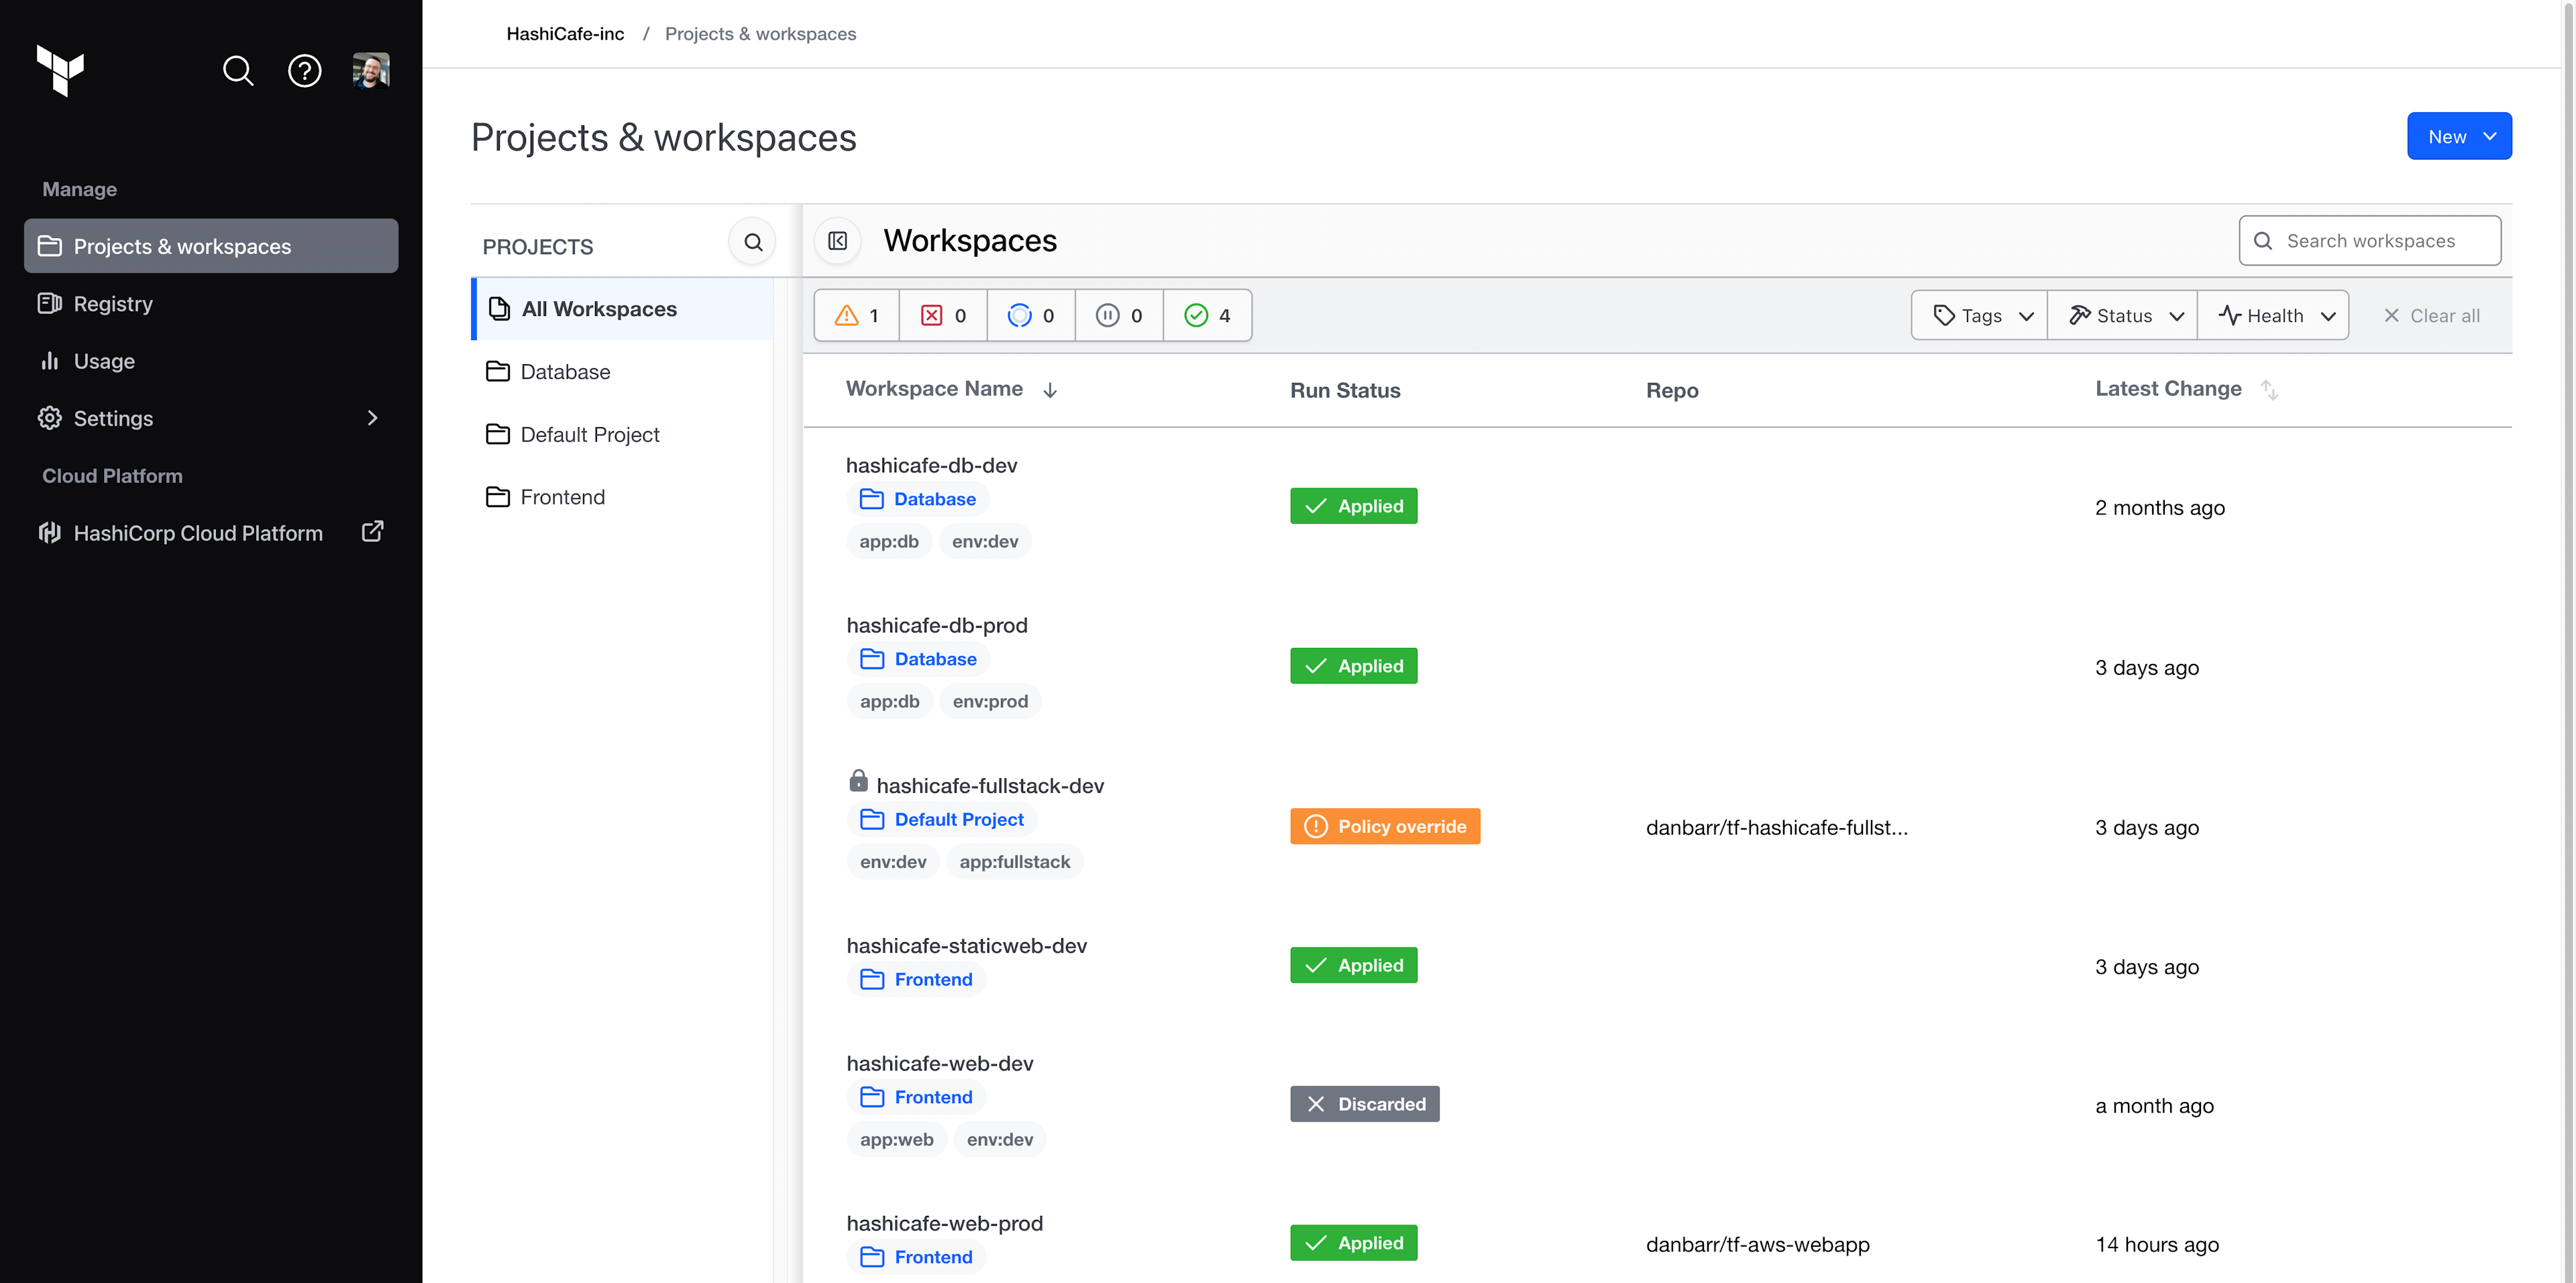 Projects & workspaces tab